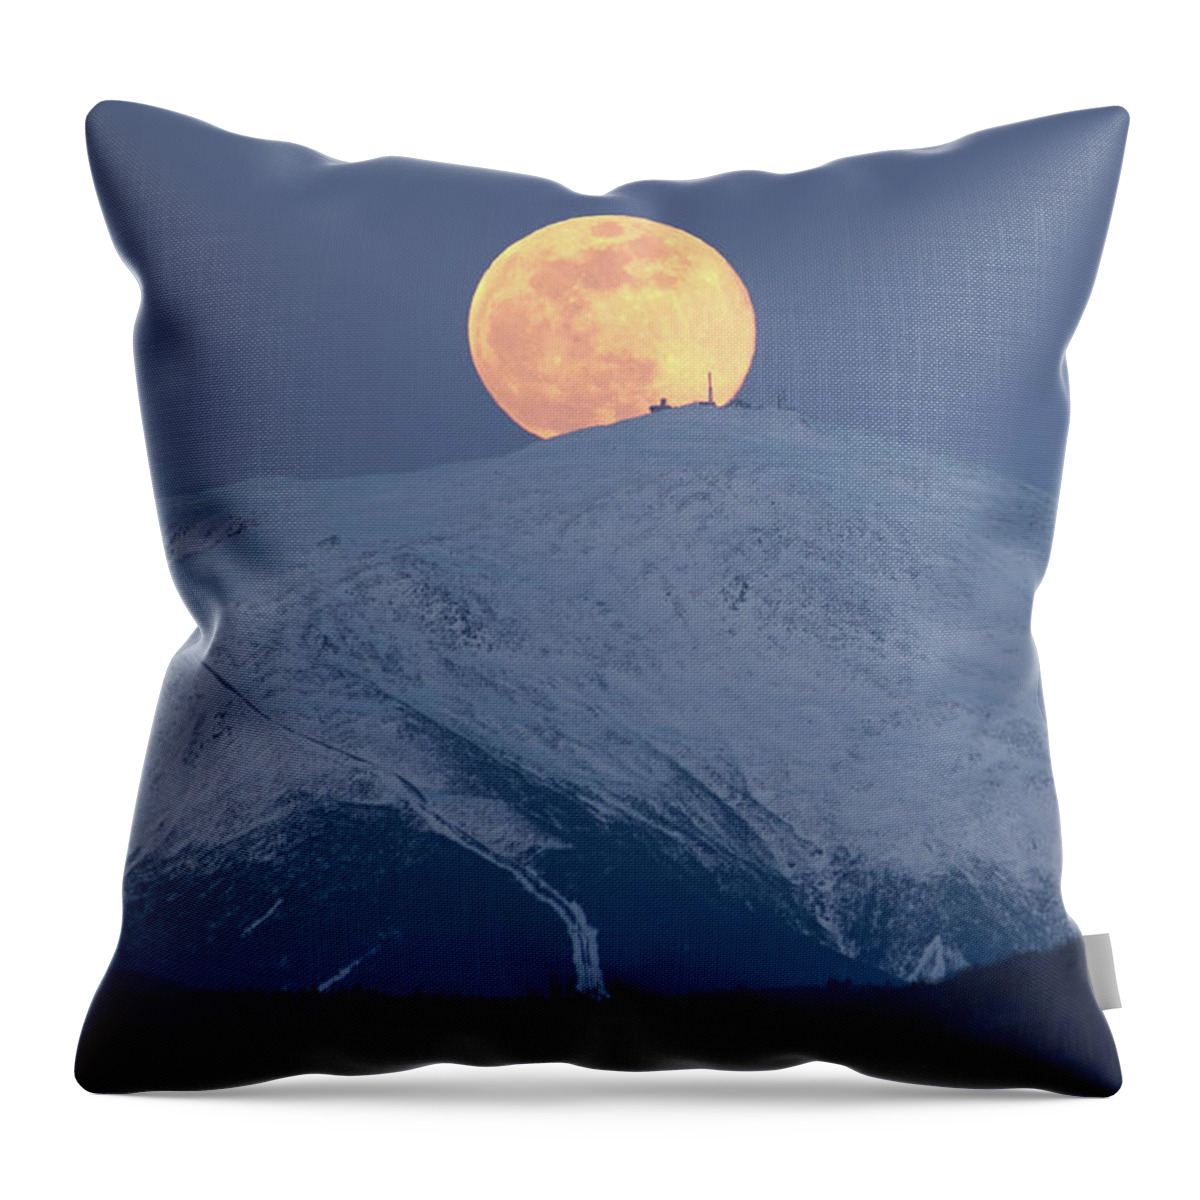 April Throw Pillow featuring the photograph April Supermoon over Washington by White Mountain Images